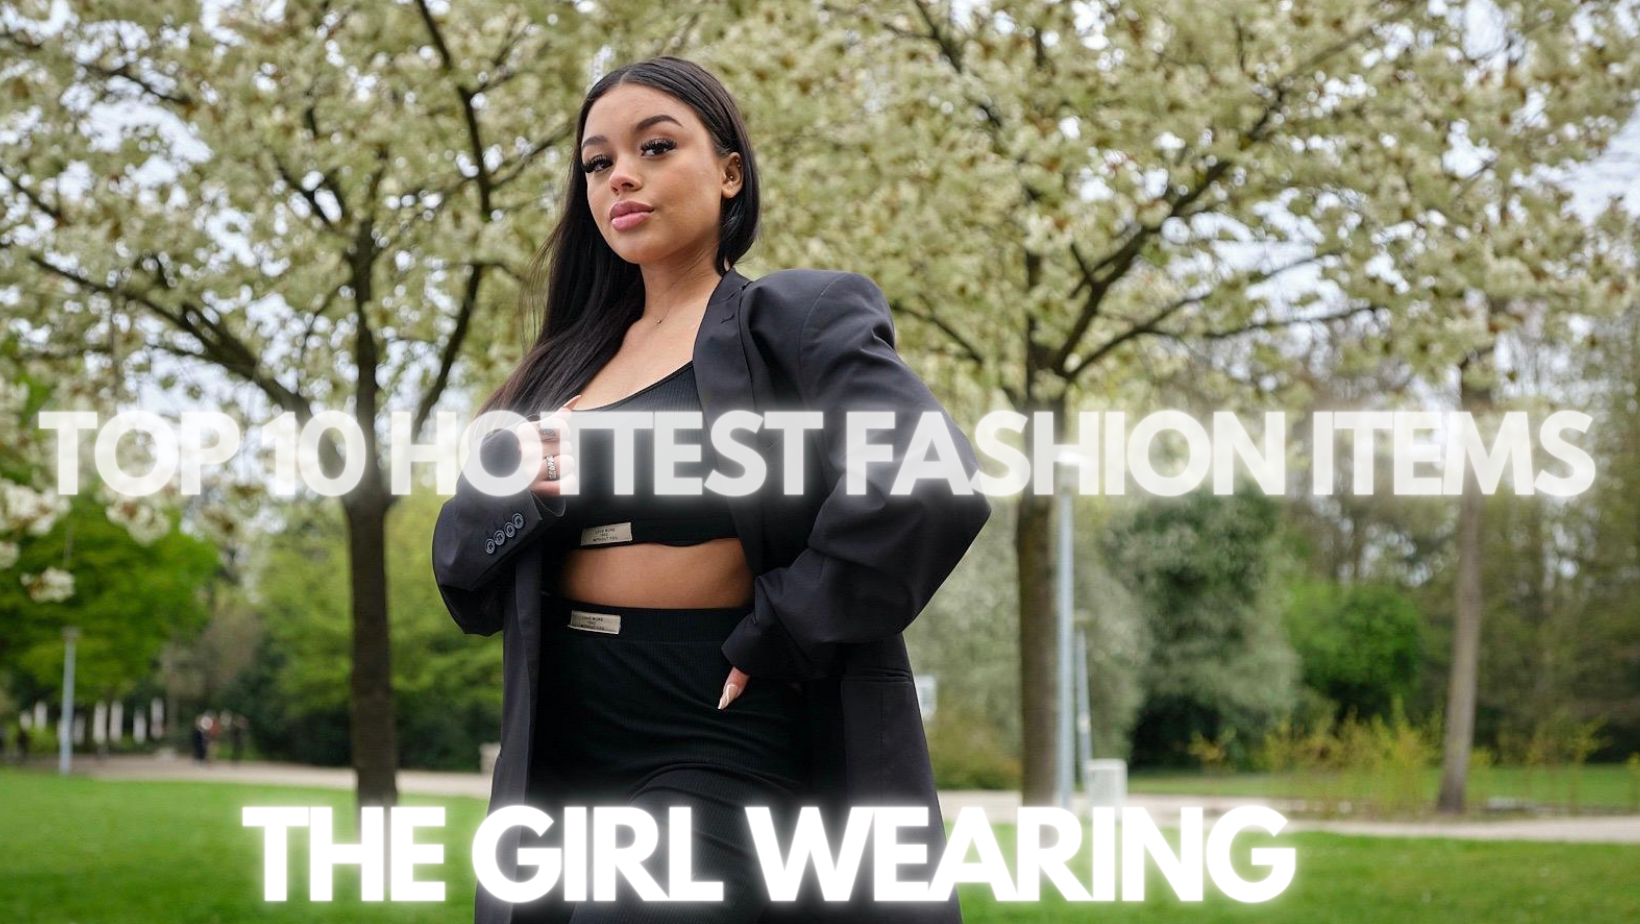 TOP 10 FASHION ITEMS BY THE GIRL WEARING